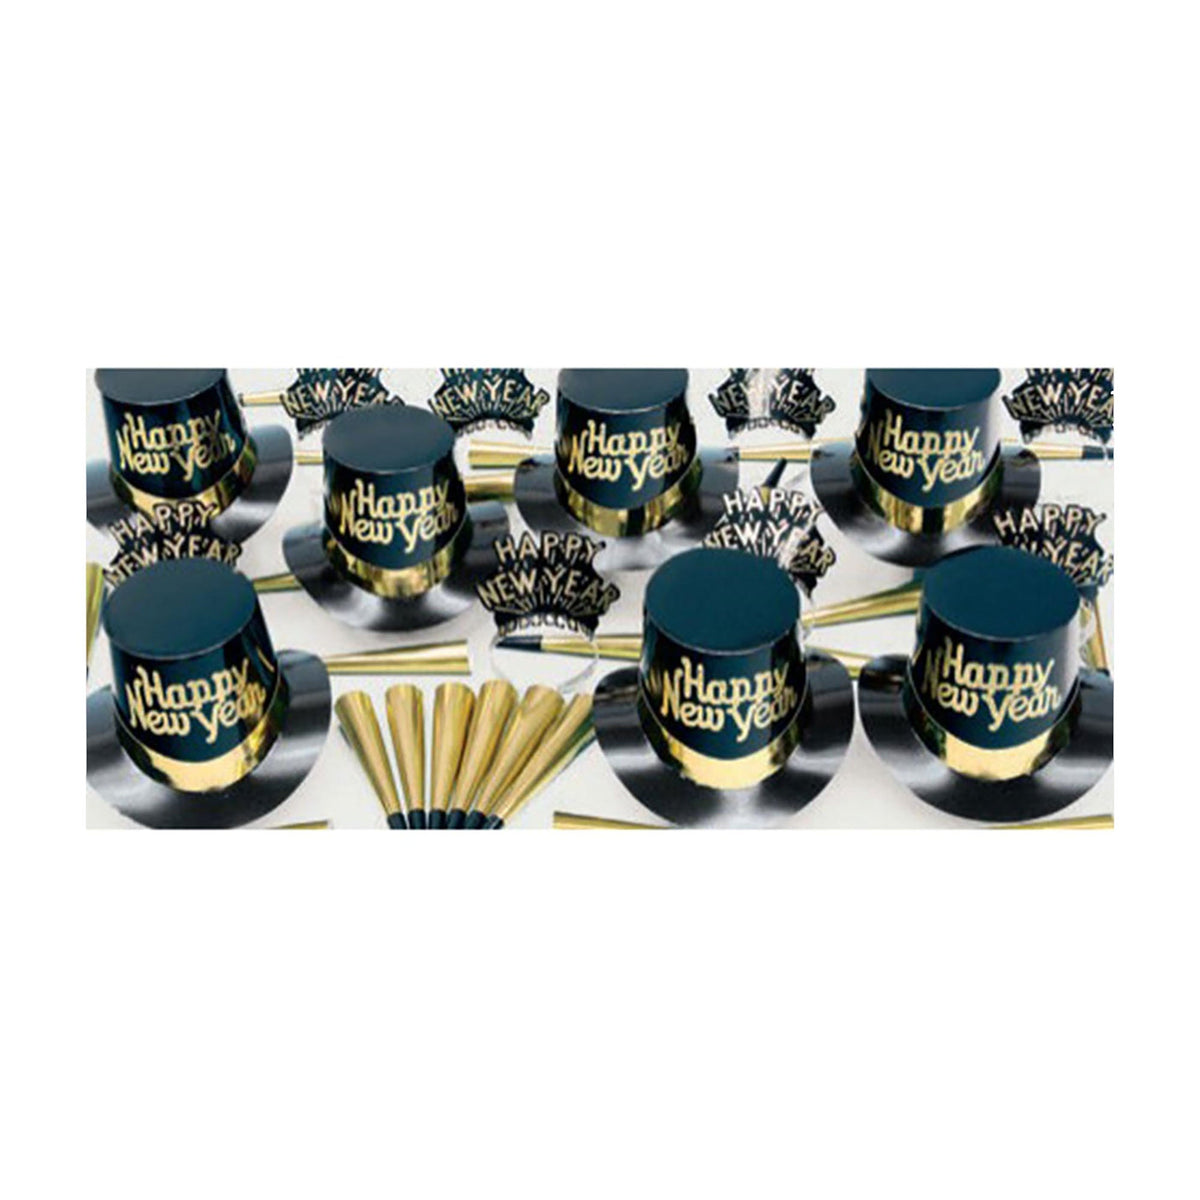 PARTY TIME MFG New Year Happy New Year Gold Dust Party Kit for 10 People, 1 Count 10372355103